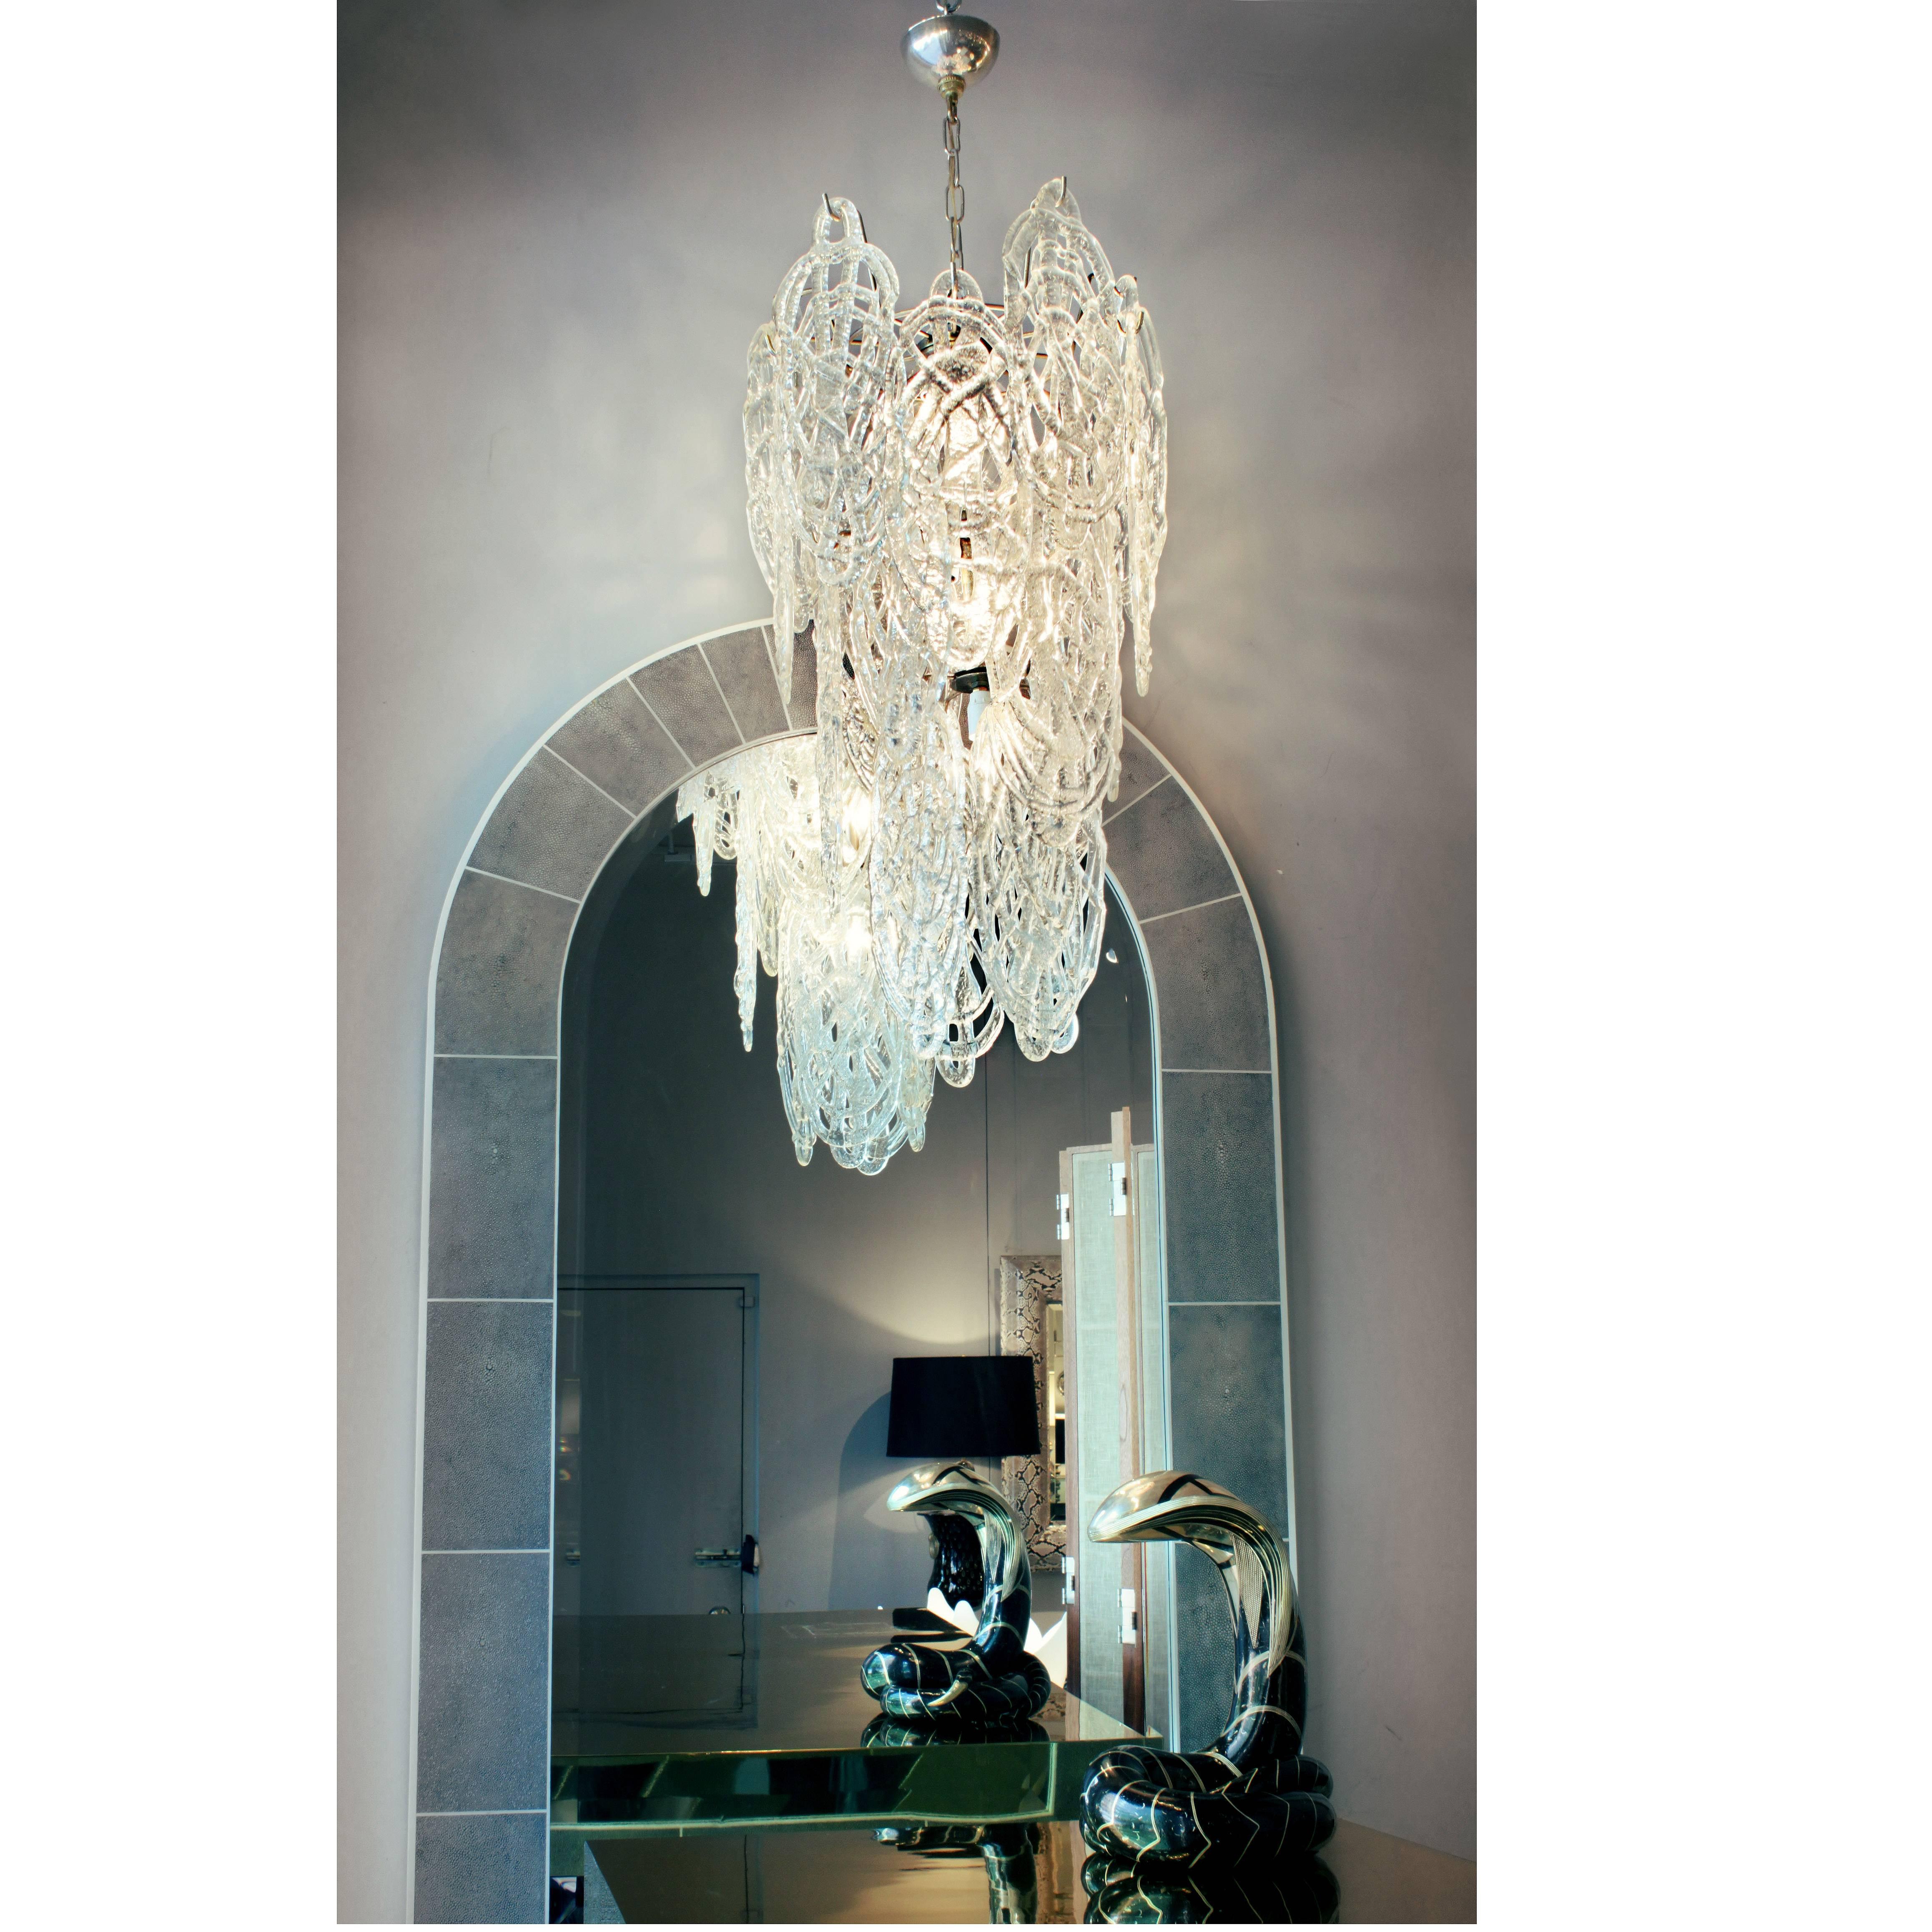 Chandelier with drizzled glass over a metal frame by Mazzega, Murano Italy, 1970s.
31 inch height is without chain and canopy. It's for the glass portion only.
   